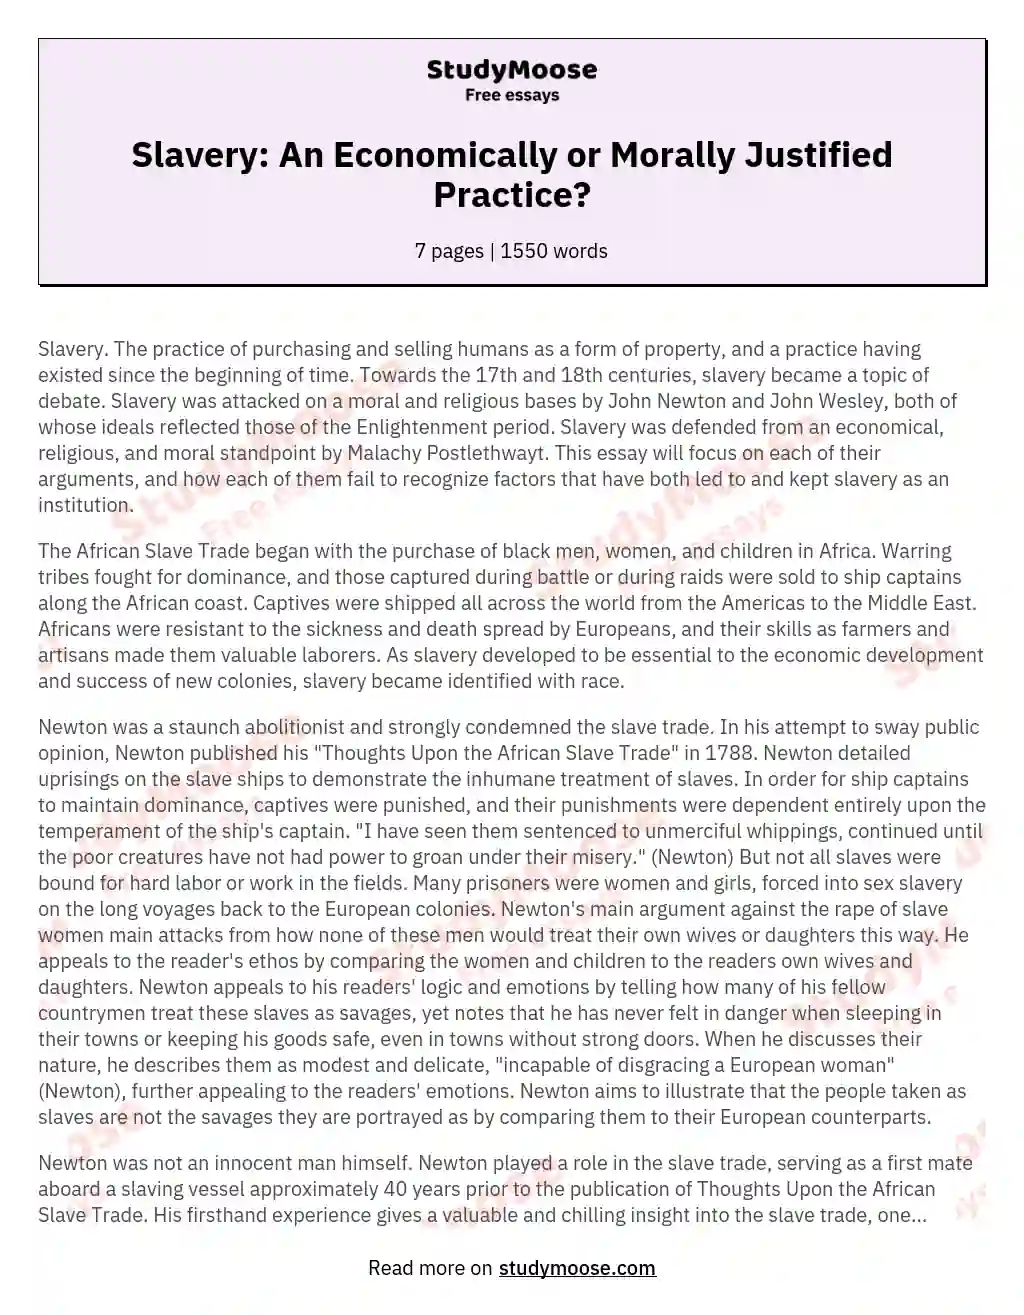 Slavery: An Economically or Morally Justified Practice? essay